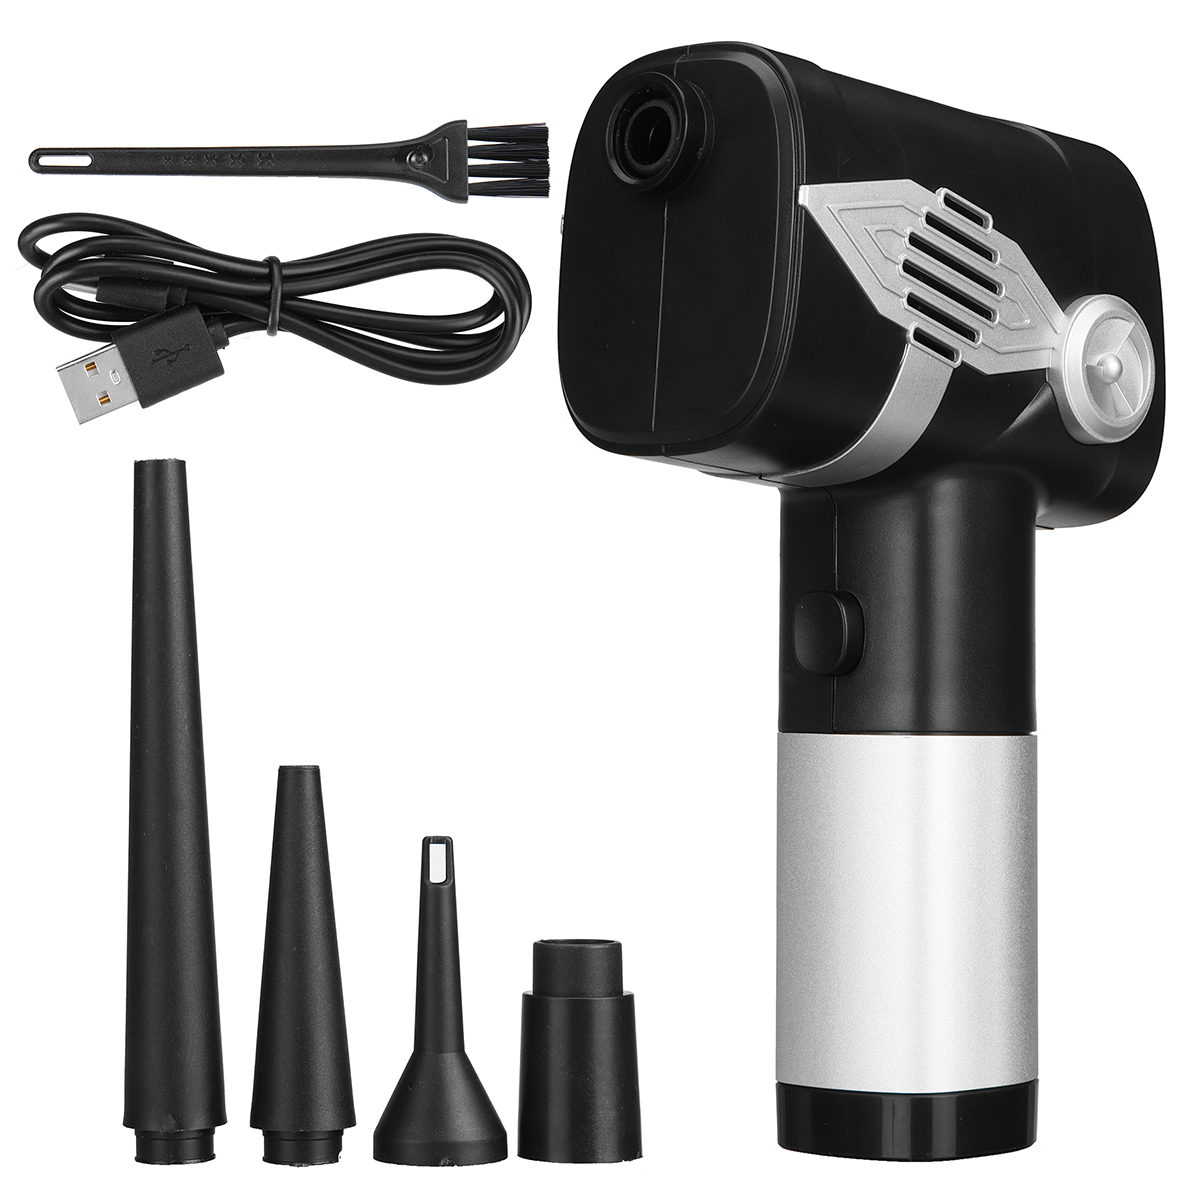 6000mAh-40000rpm-Electric-Brushless-Hand-held-Blower-3-Gears-LED-Display-with-Nozzles-1931065-13